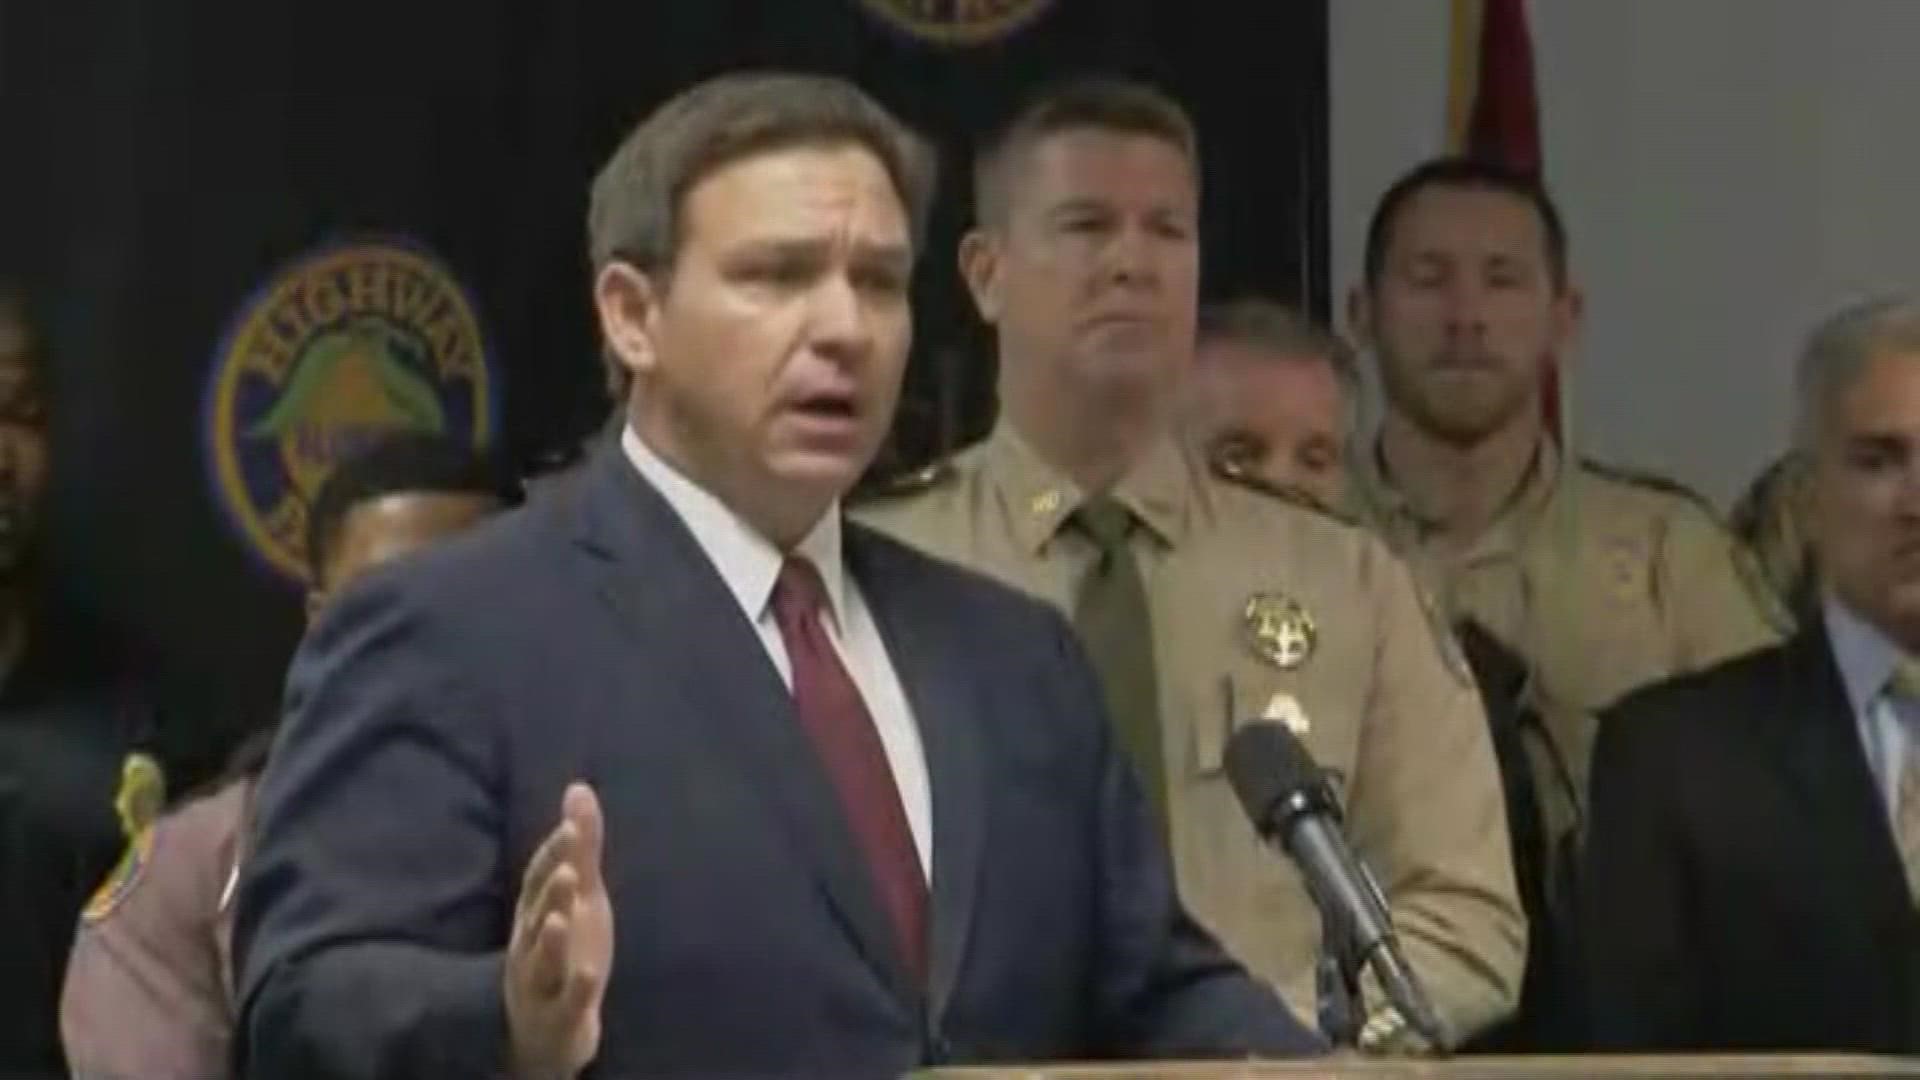 Gov. DeSantis says the media lied about several aspects of the Rittenhouse case.